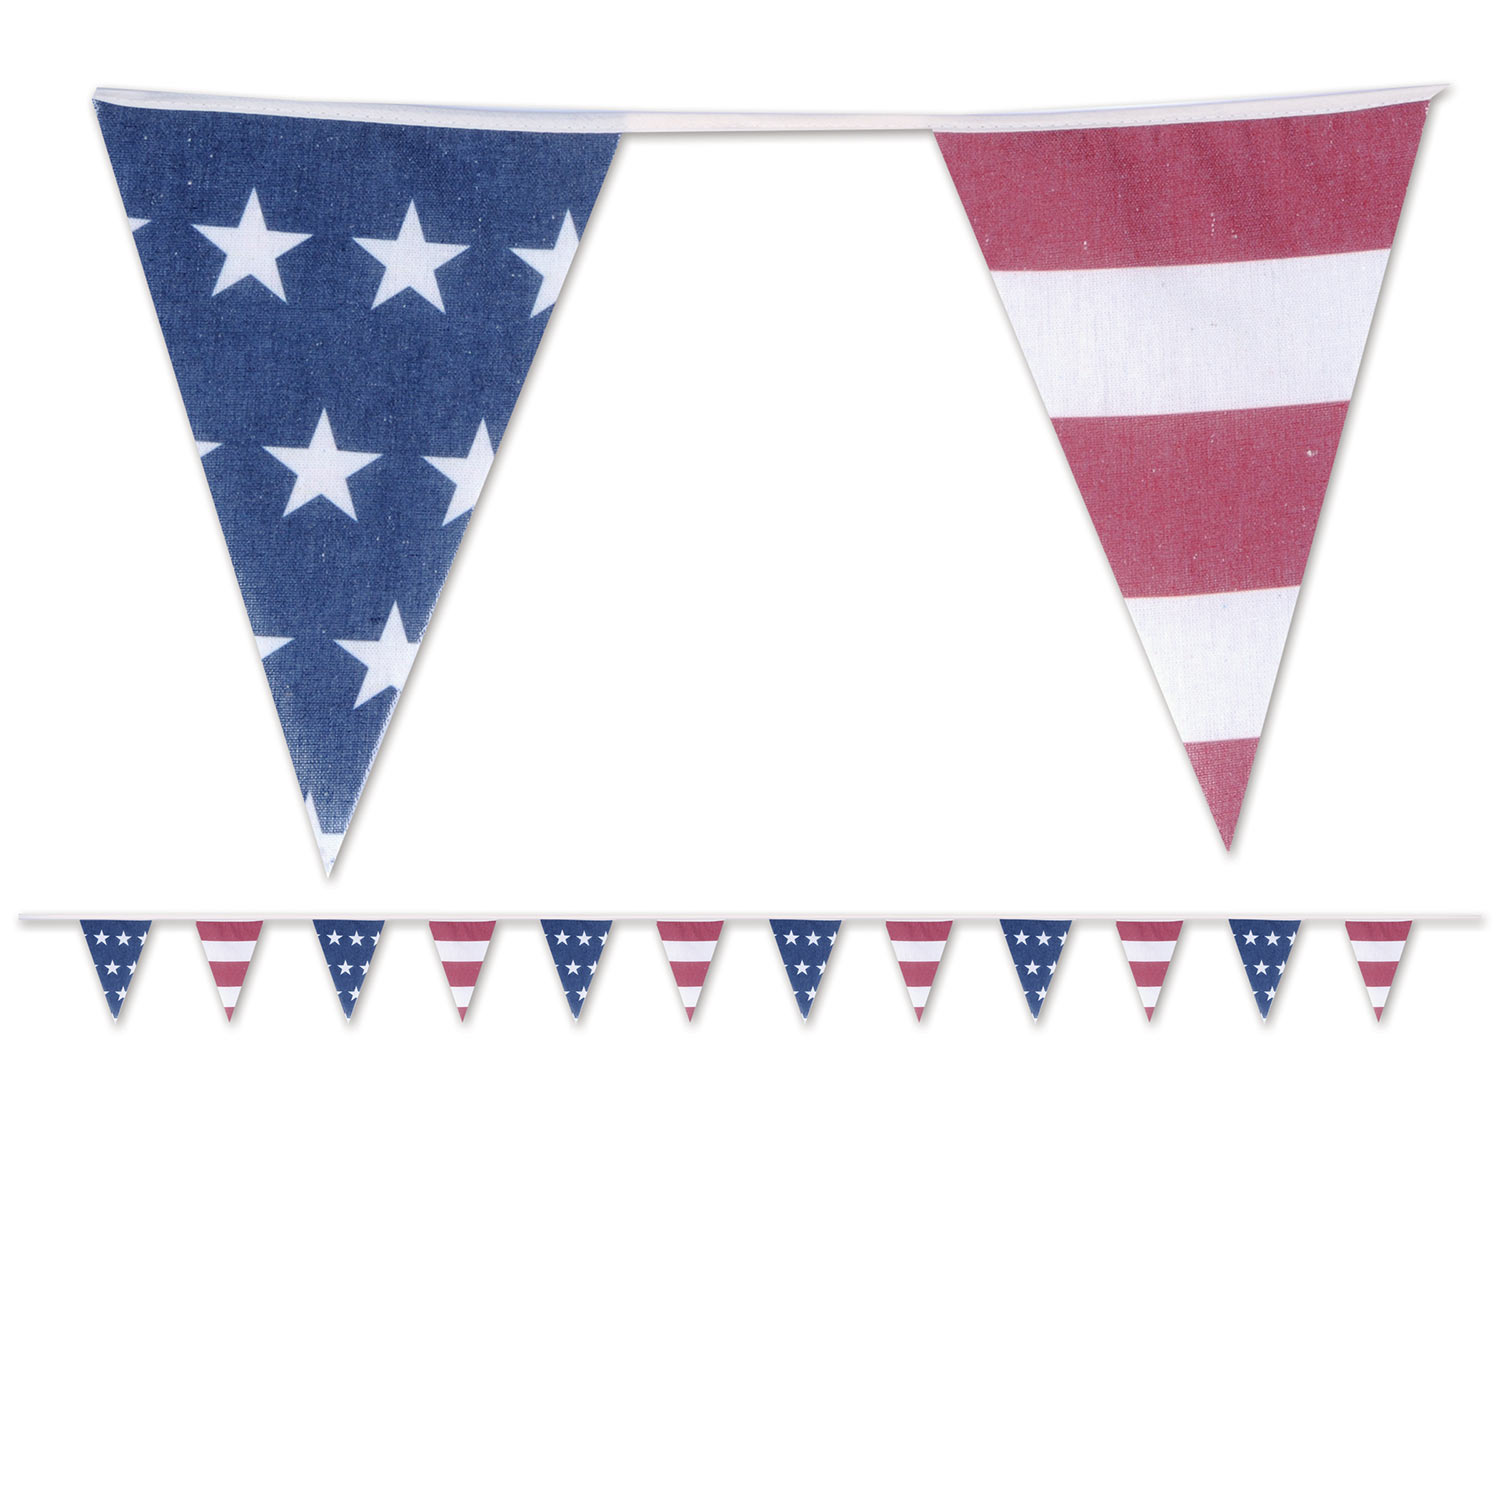 Banner with patriotic stars and stripes pennants.